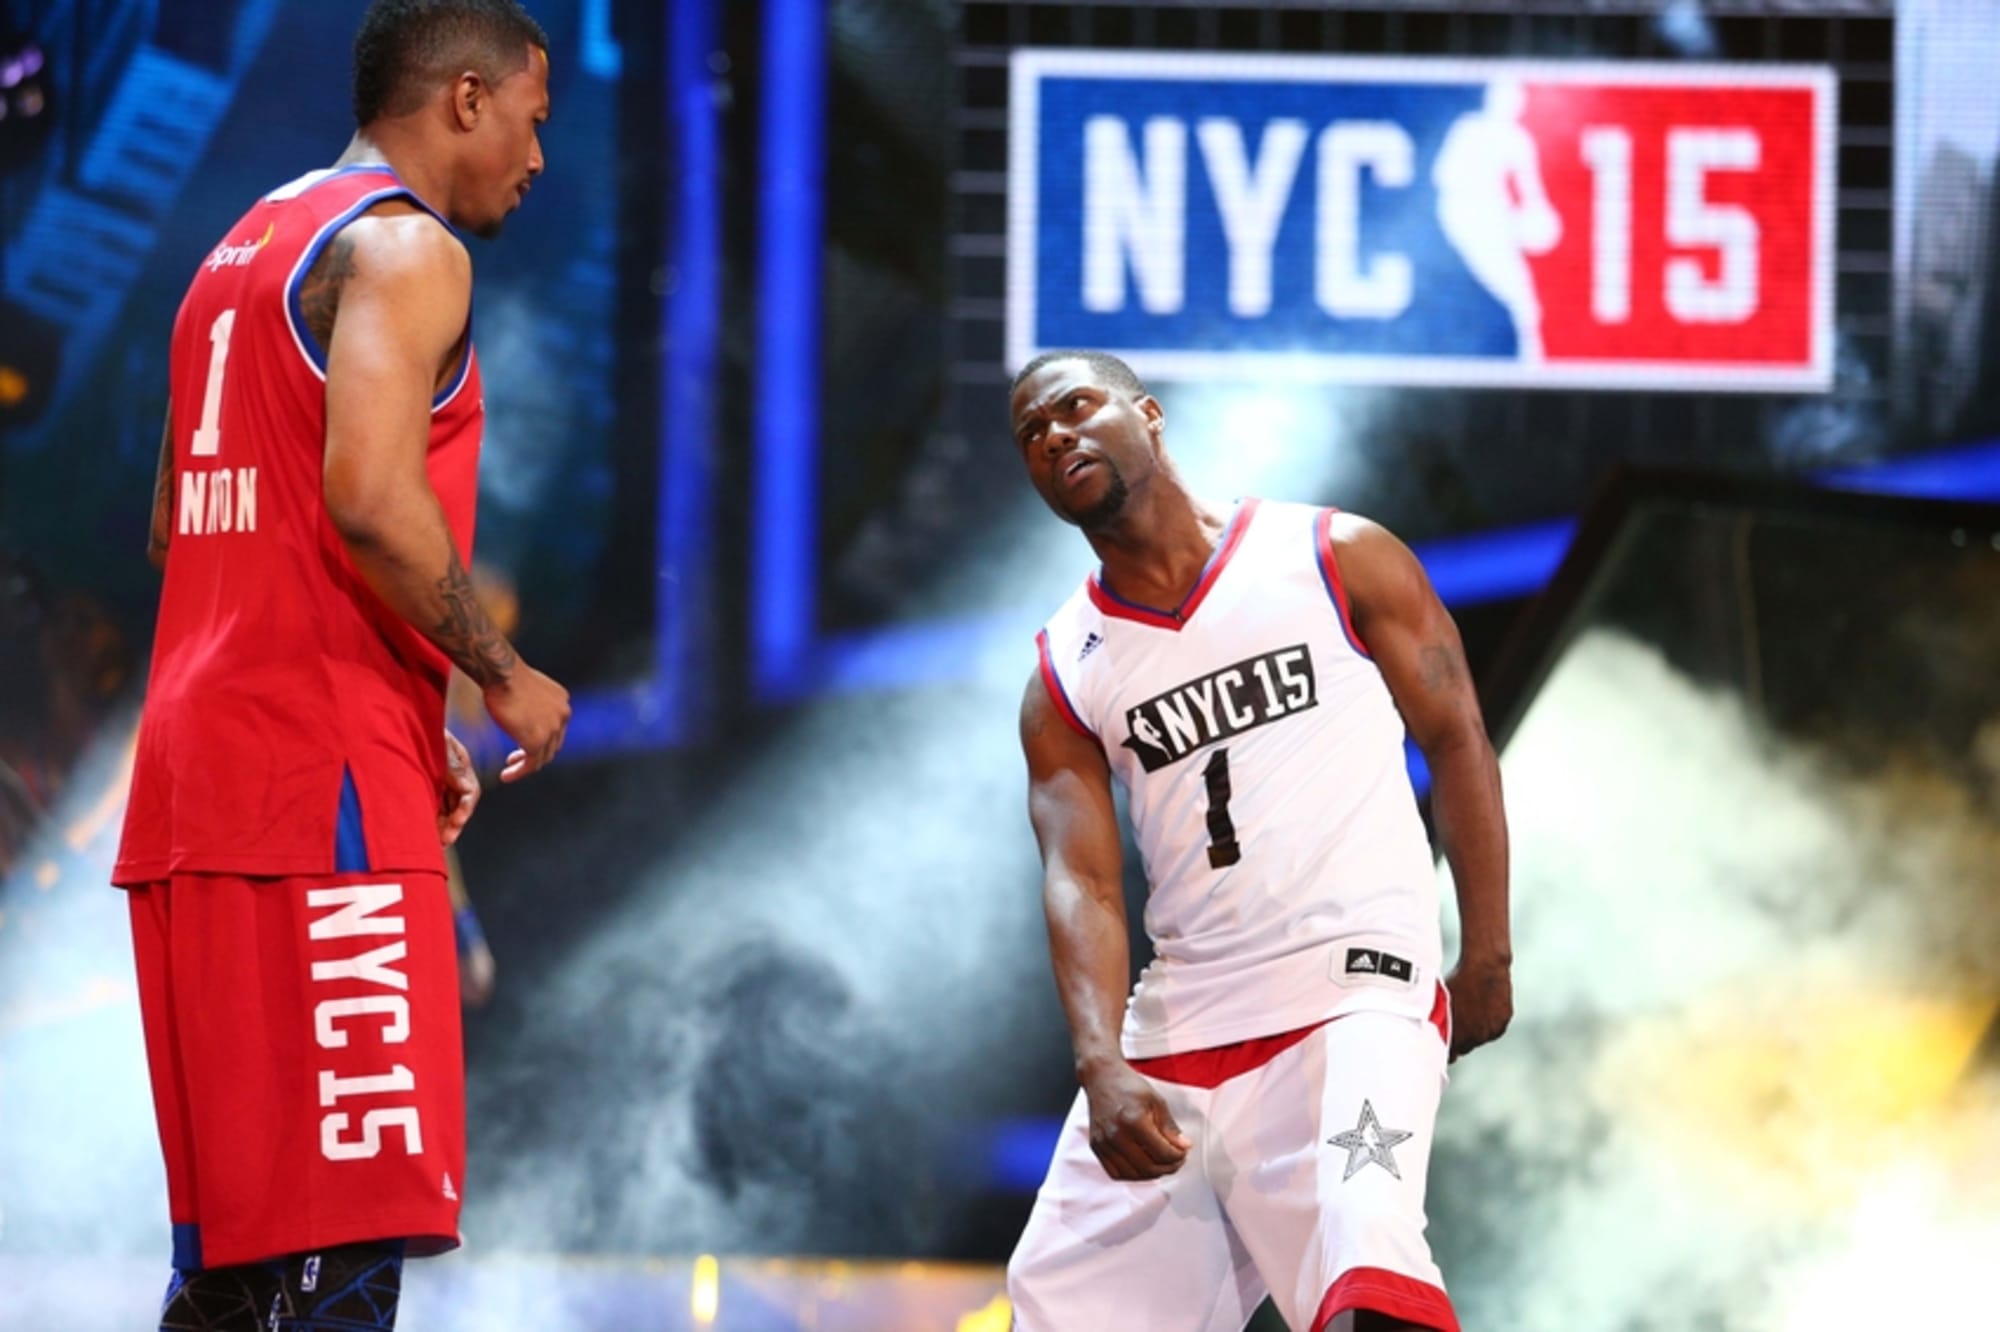 Kevin Hart wins another MVP in NBA Celebrity AllStar Game (Video)